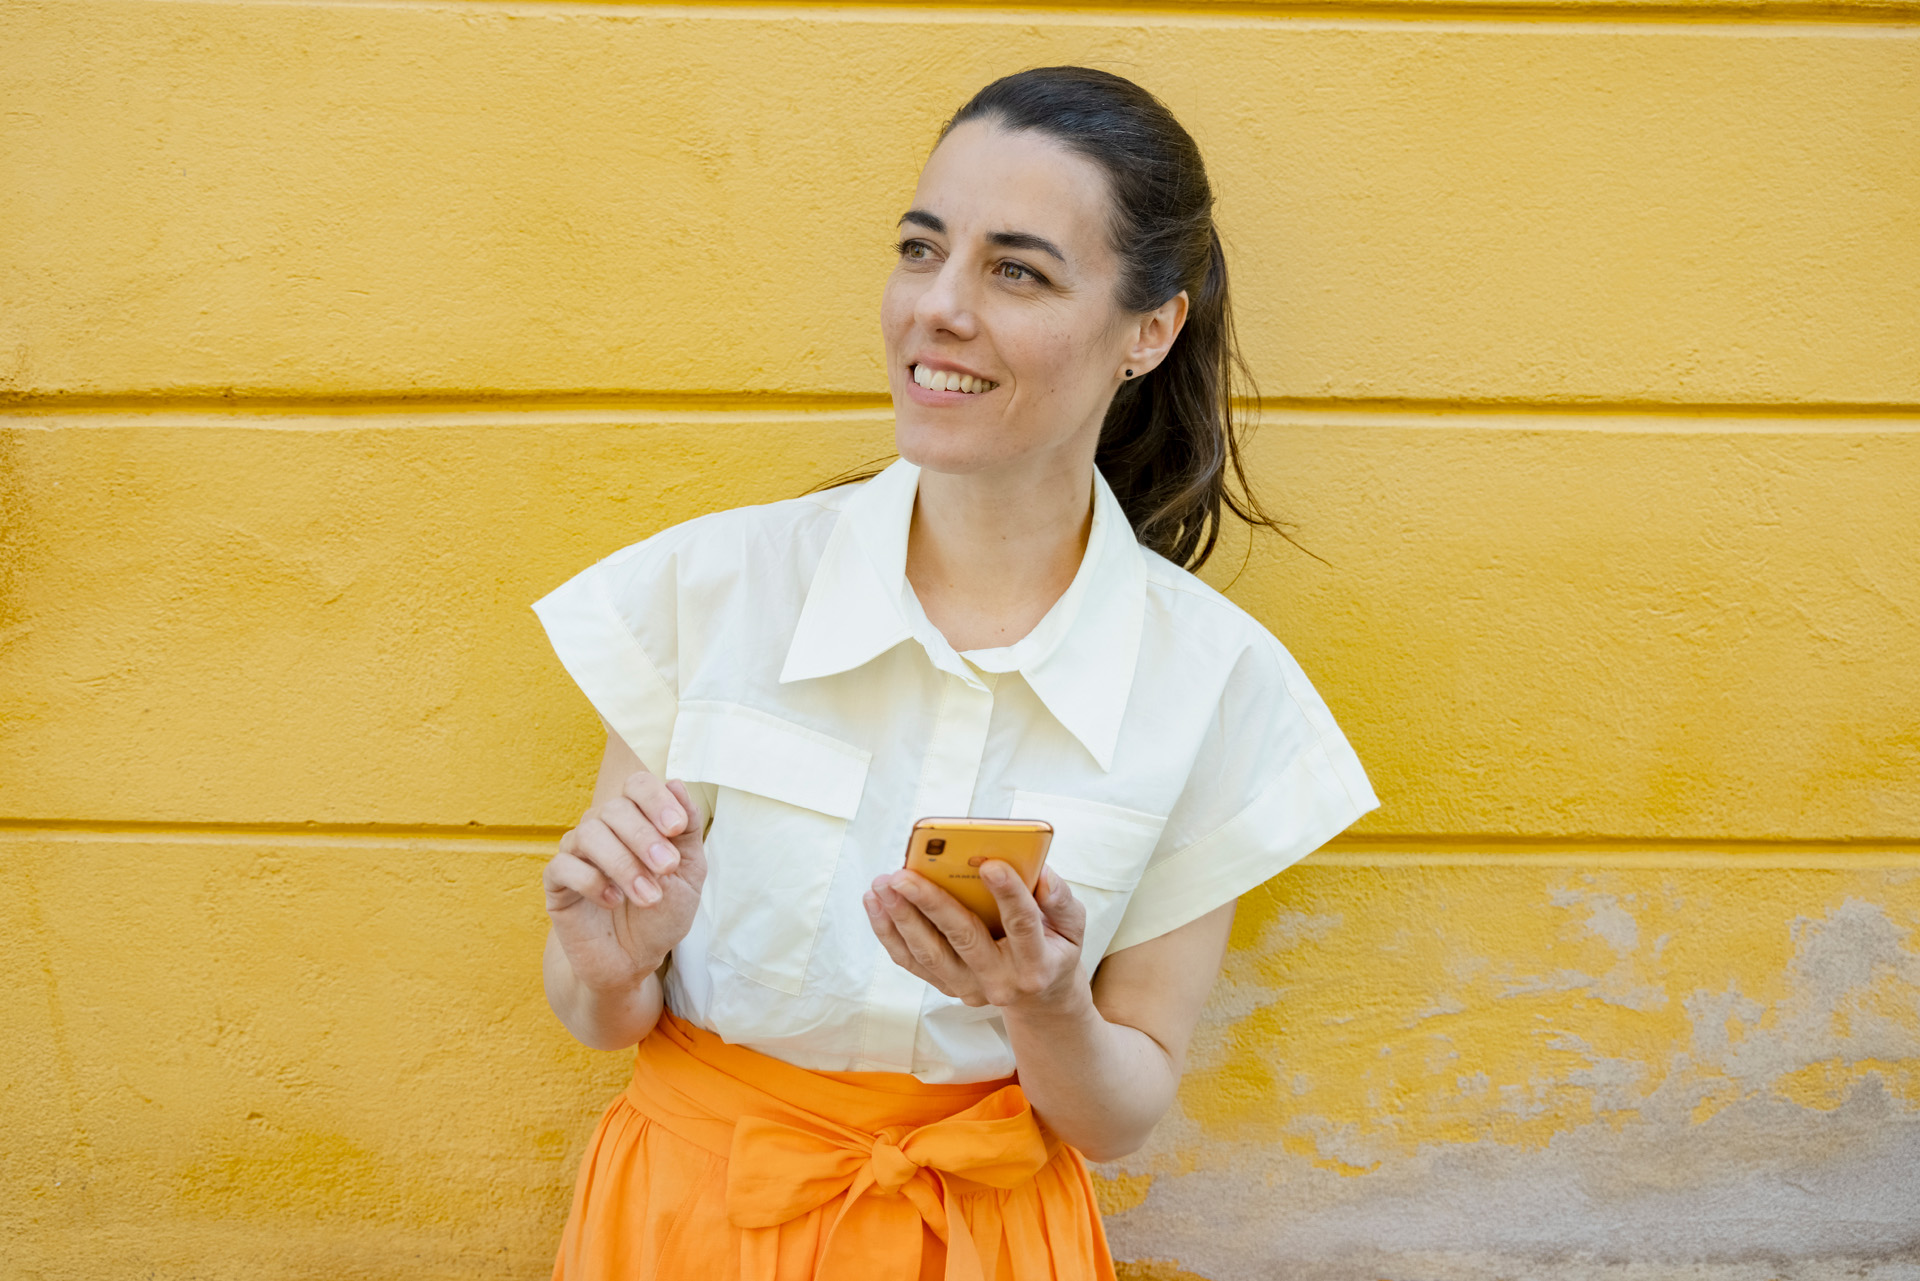 A woman holding a mobile phone.